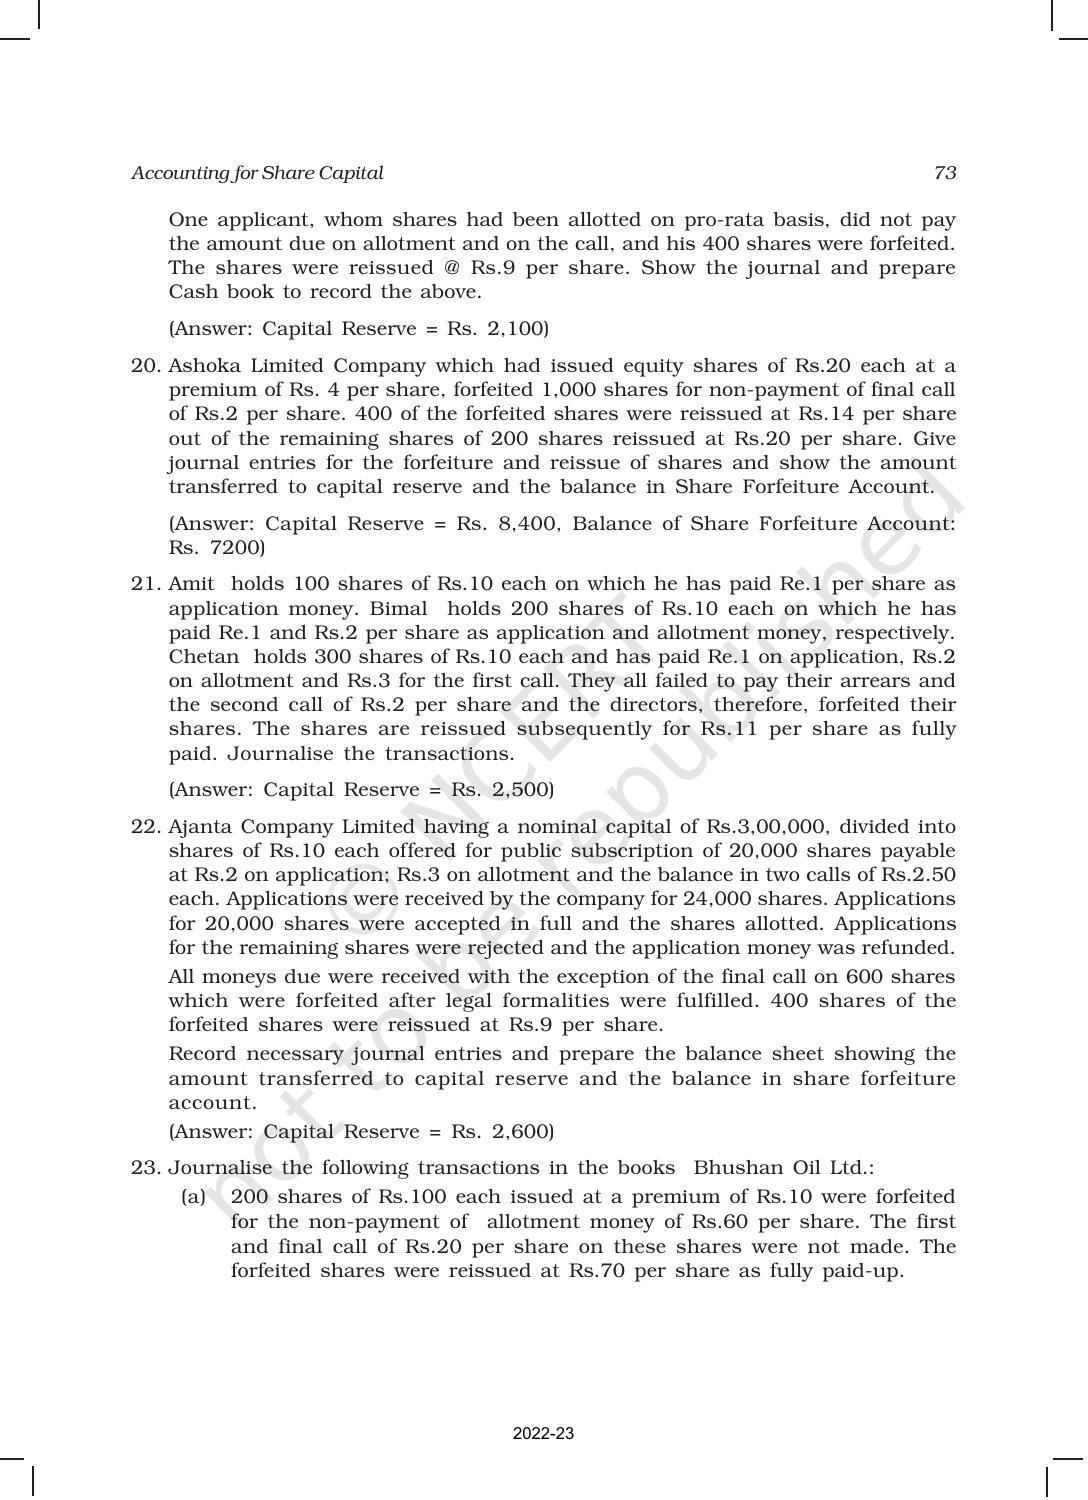 NCERT Book for Class 12 Accountancy Part II Chapter 1 Accounting for Share Capital - Page 73